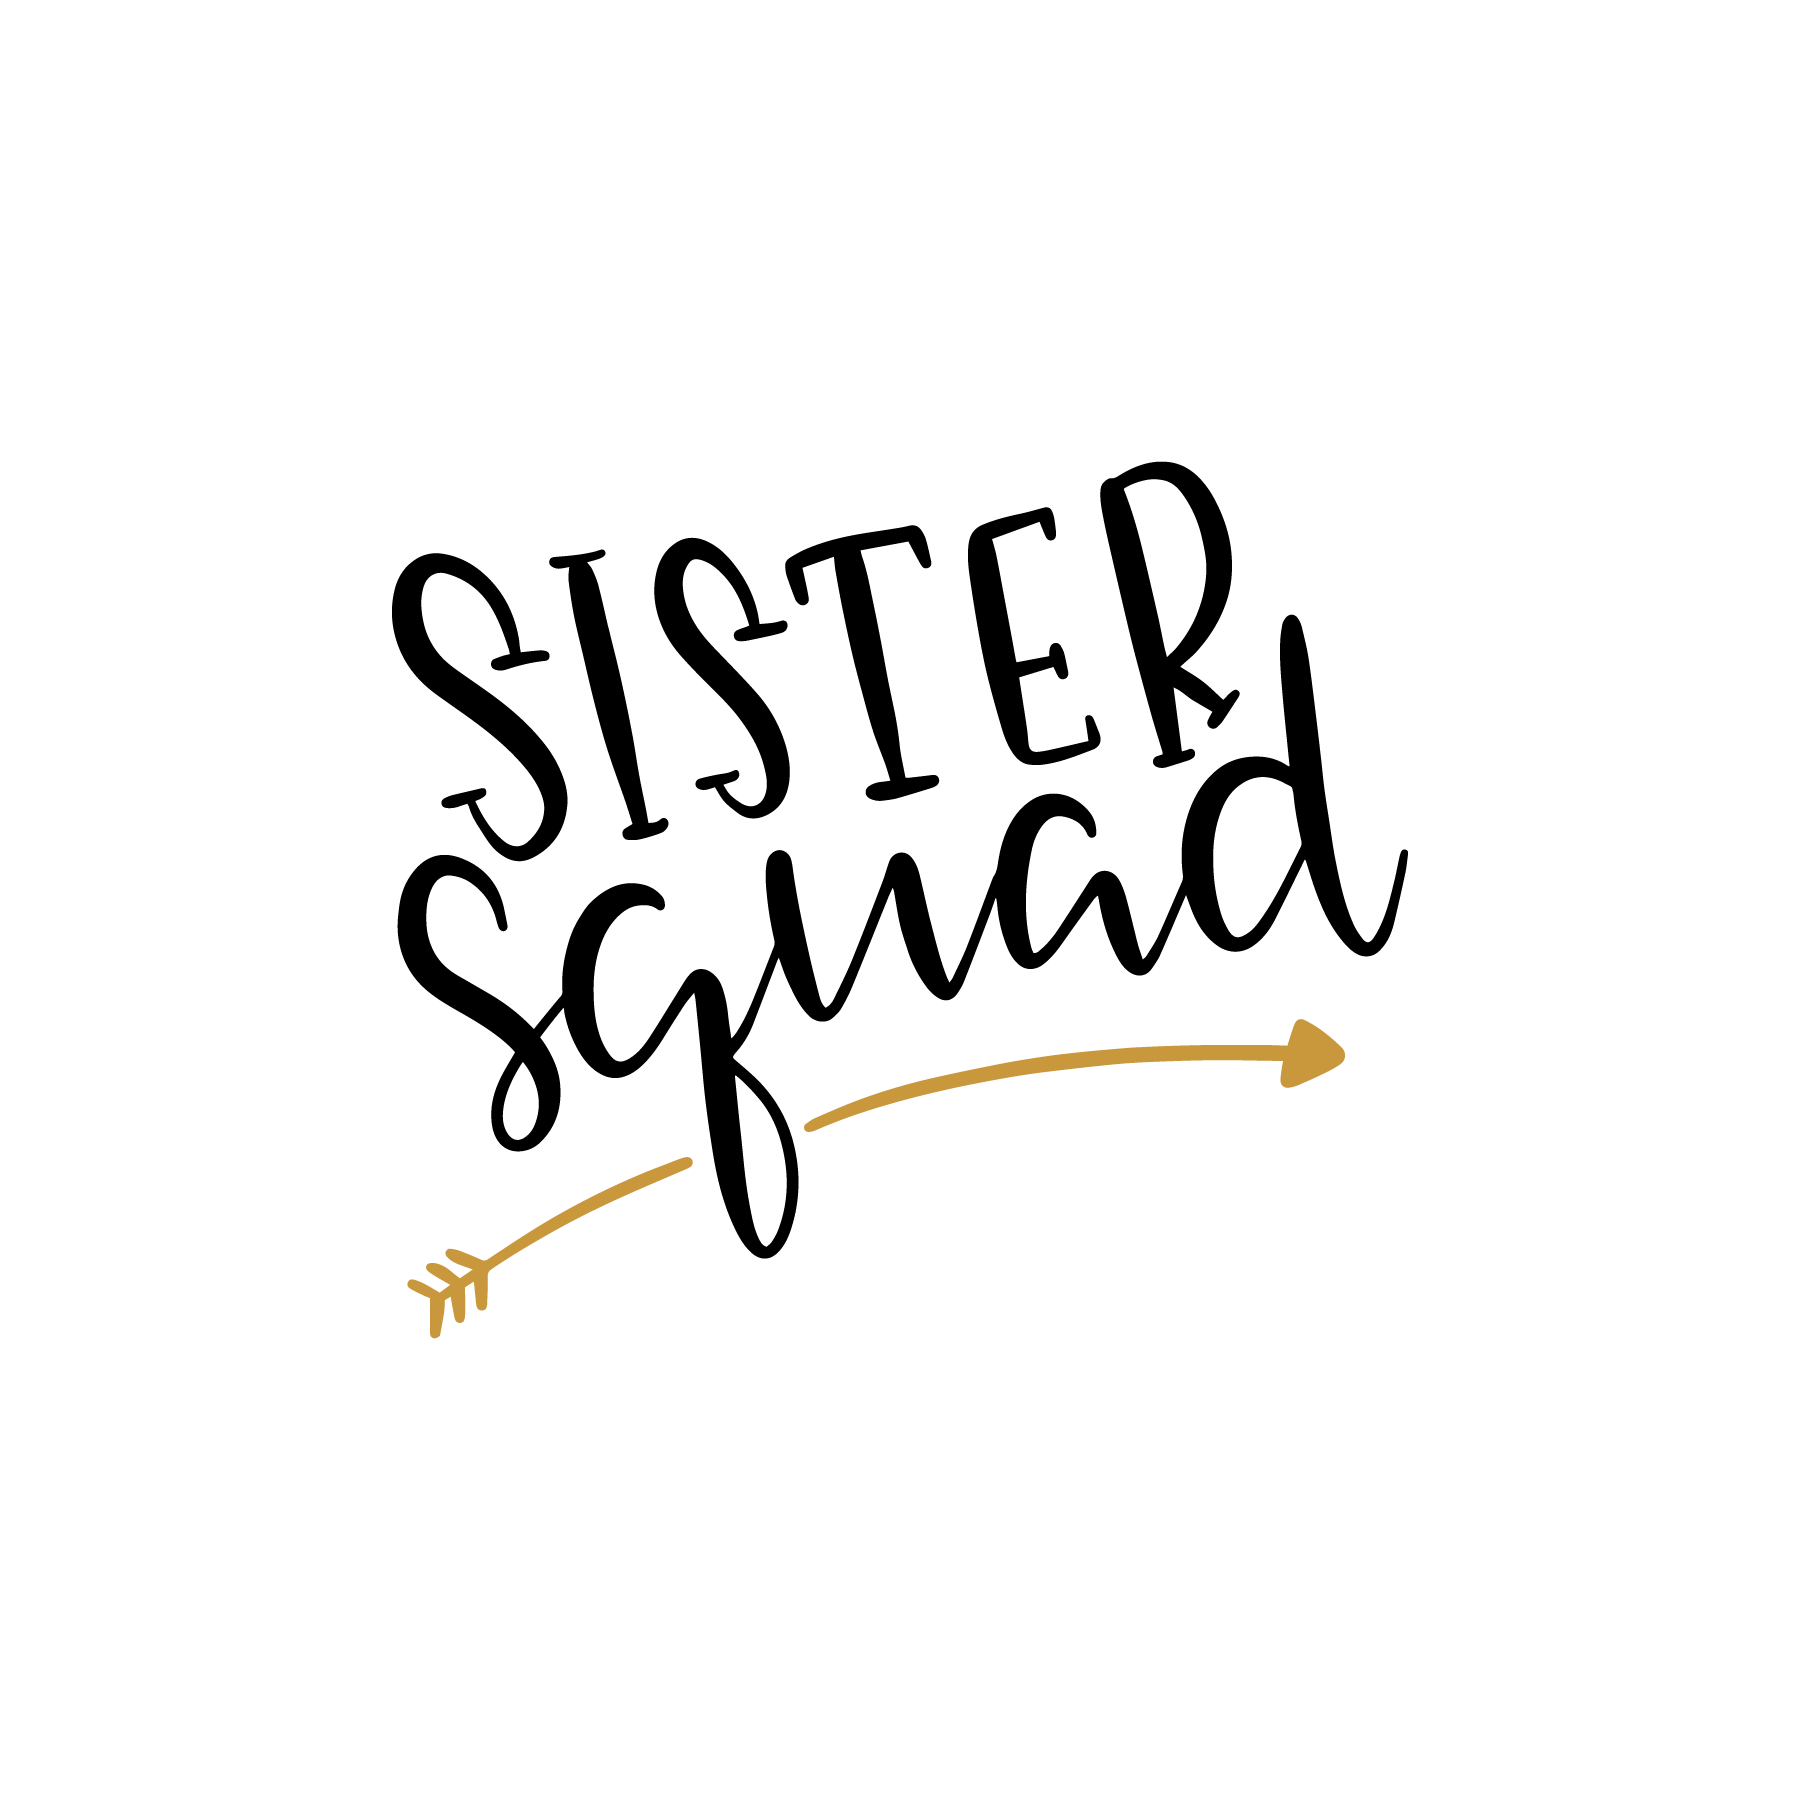 Decals. Sister quotes, Sister